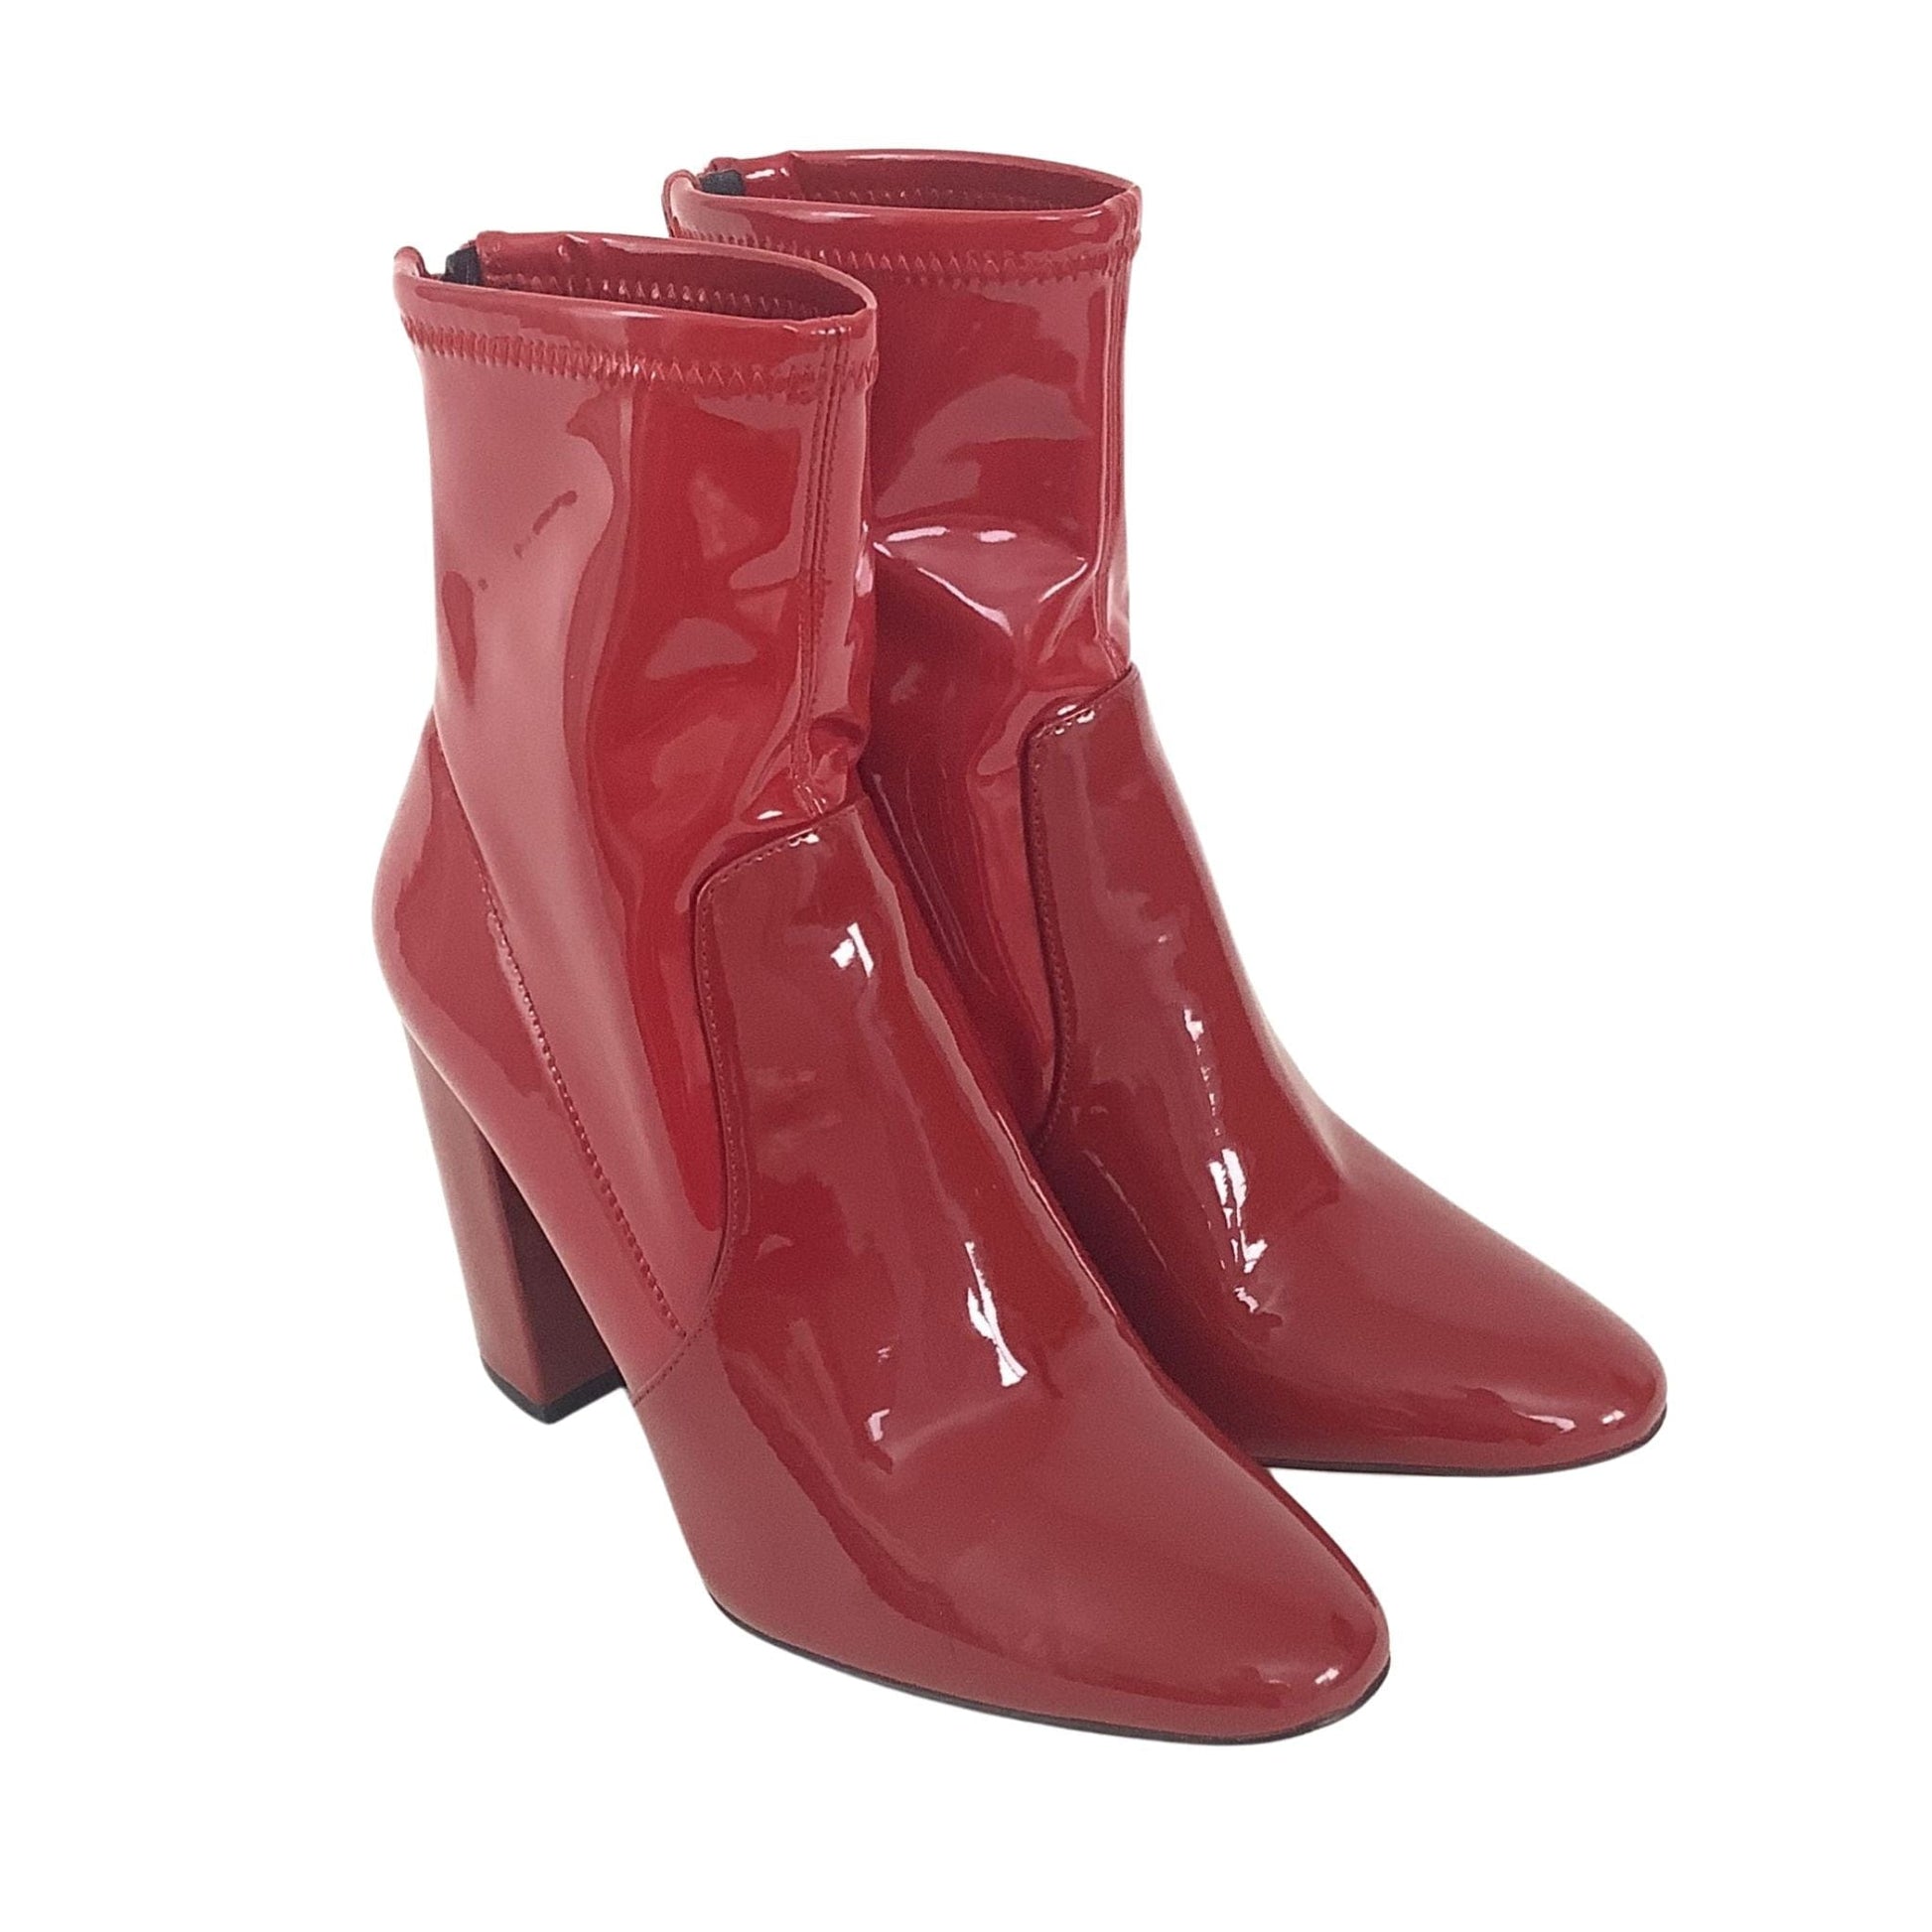 Glossy Red Booties 7 / Red / Classic